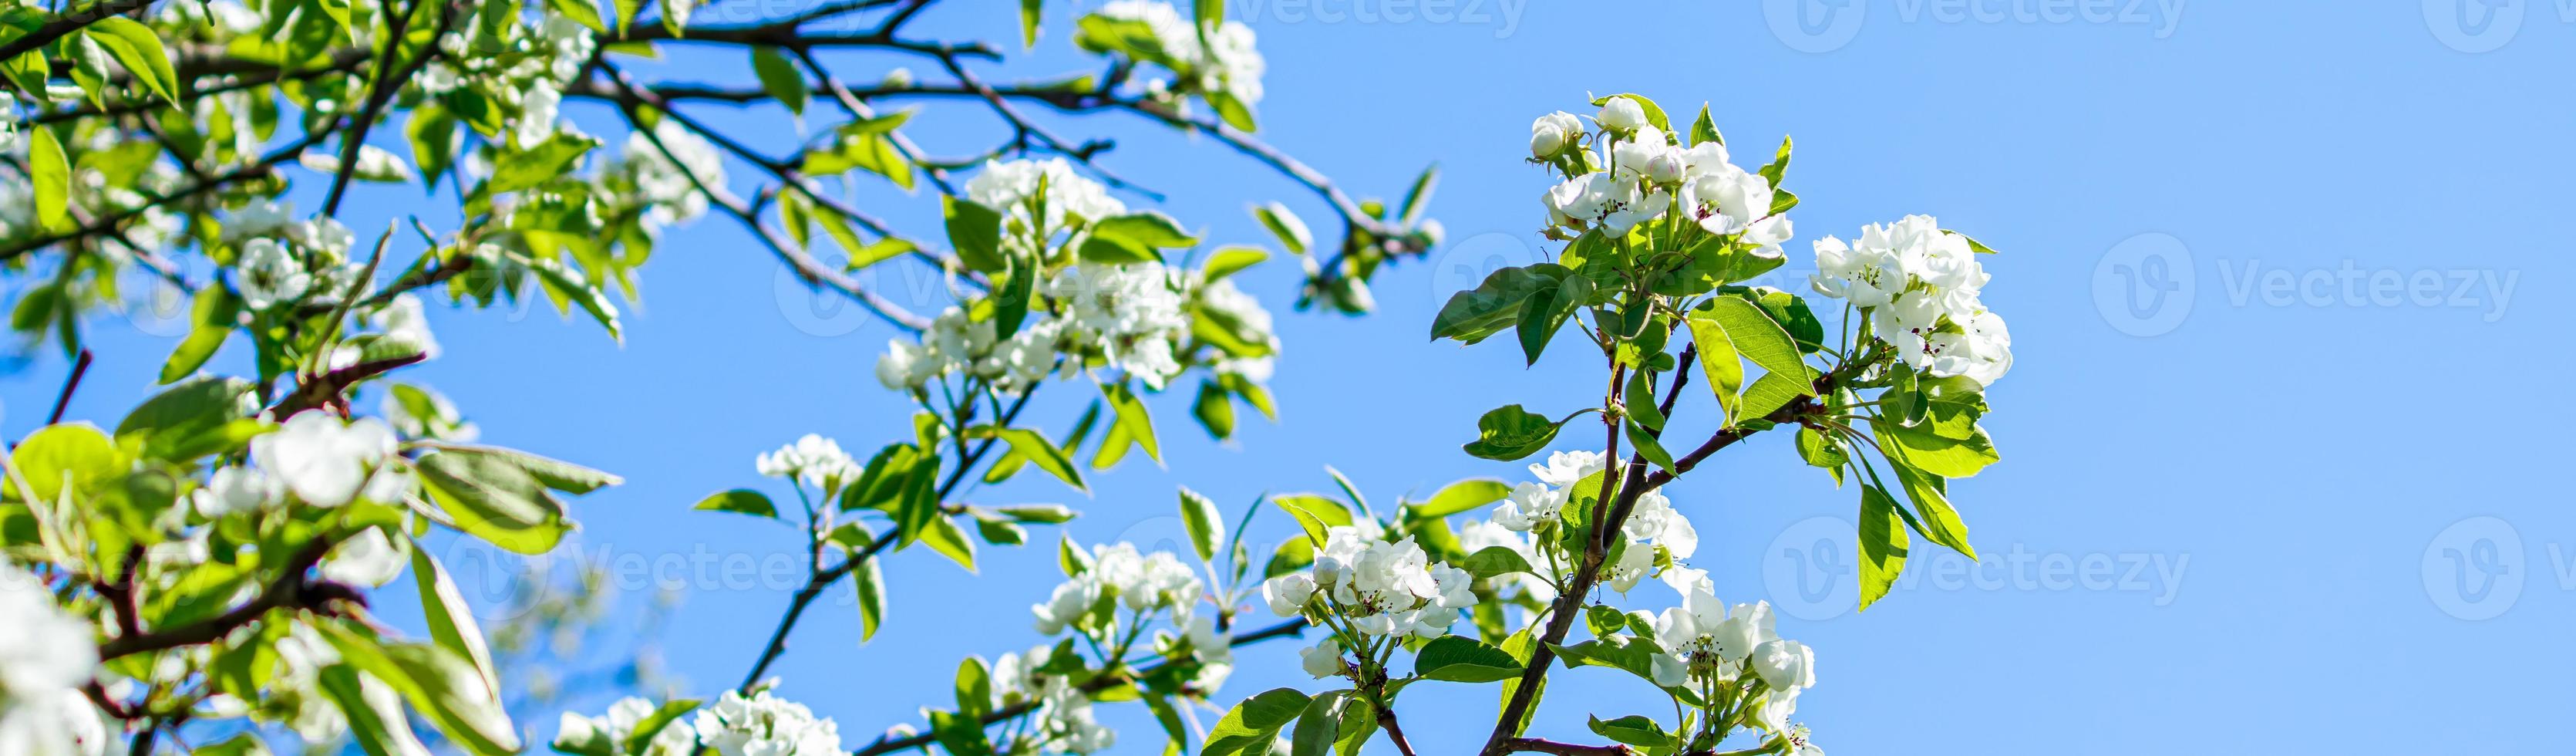 Blooming apple tree branch in garden on blue sky background. Spring cherry flowers close up. photo